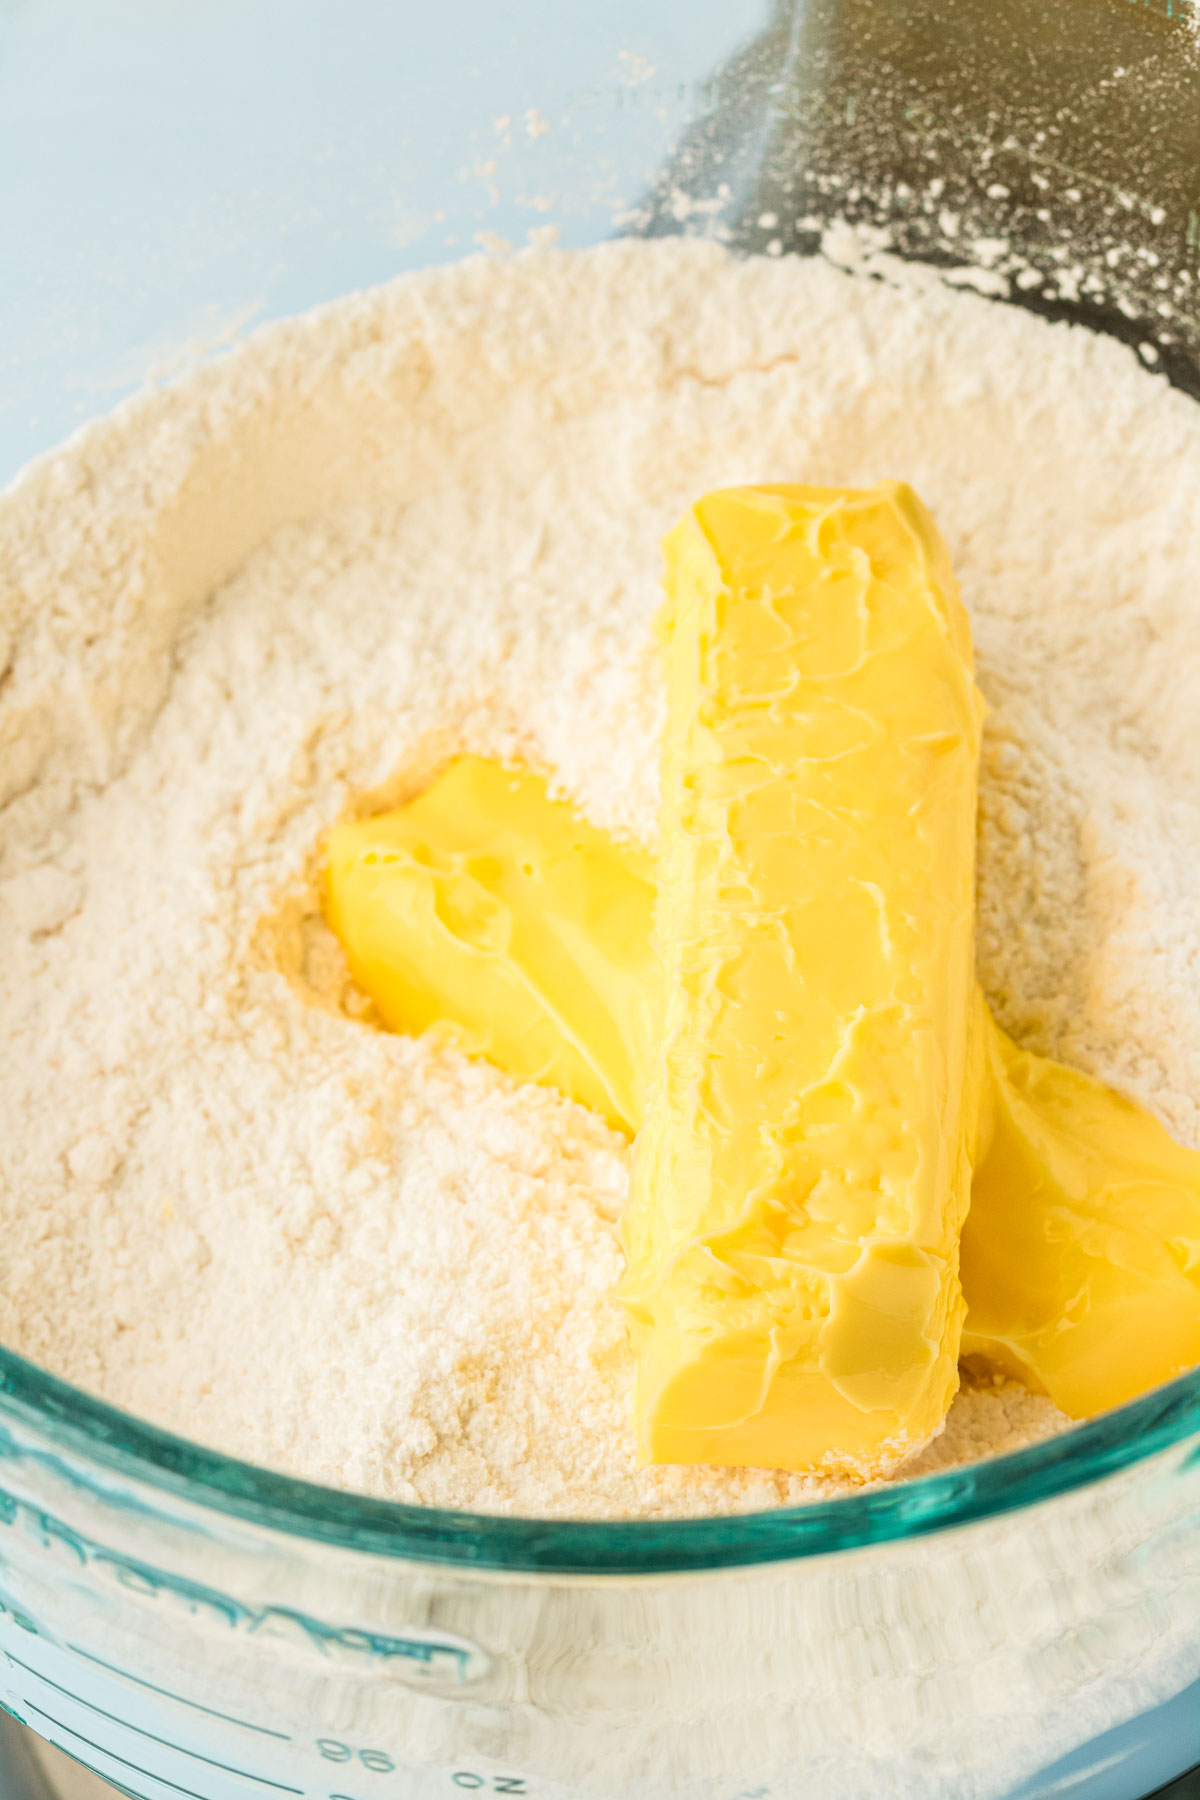 Butter being added to dry ingredients to make cake.